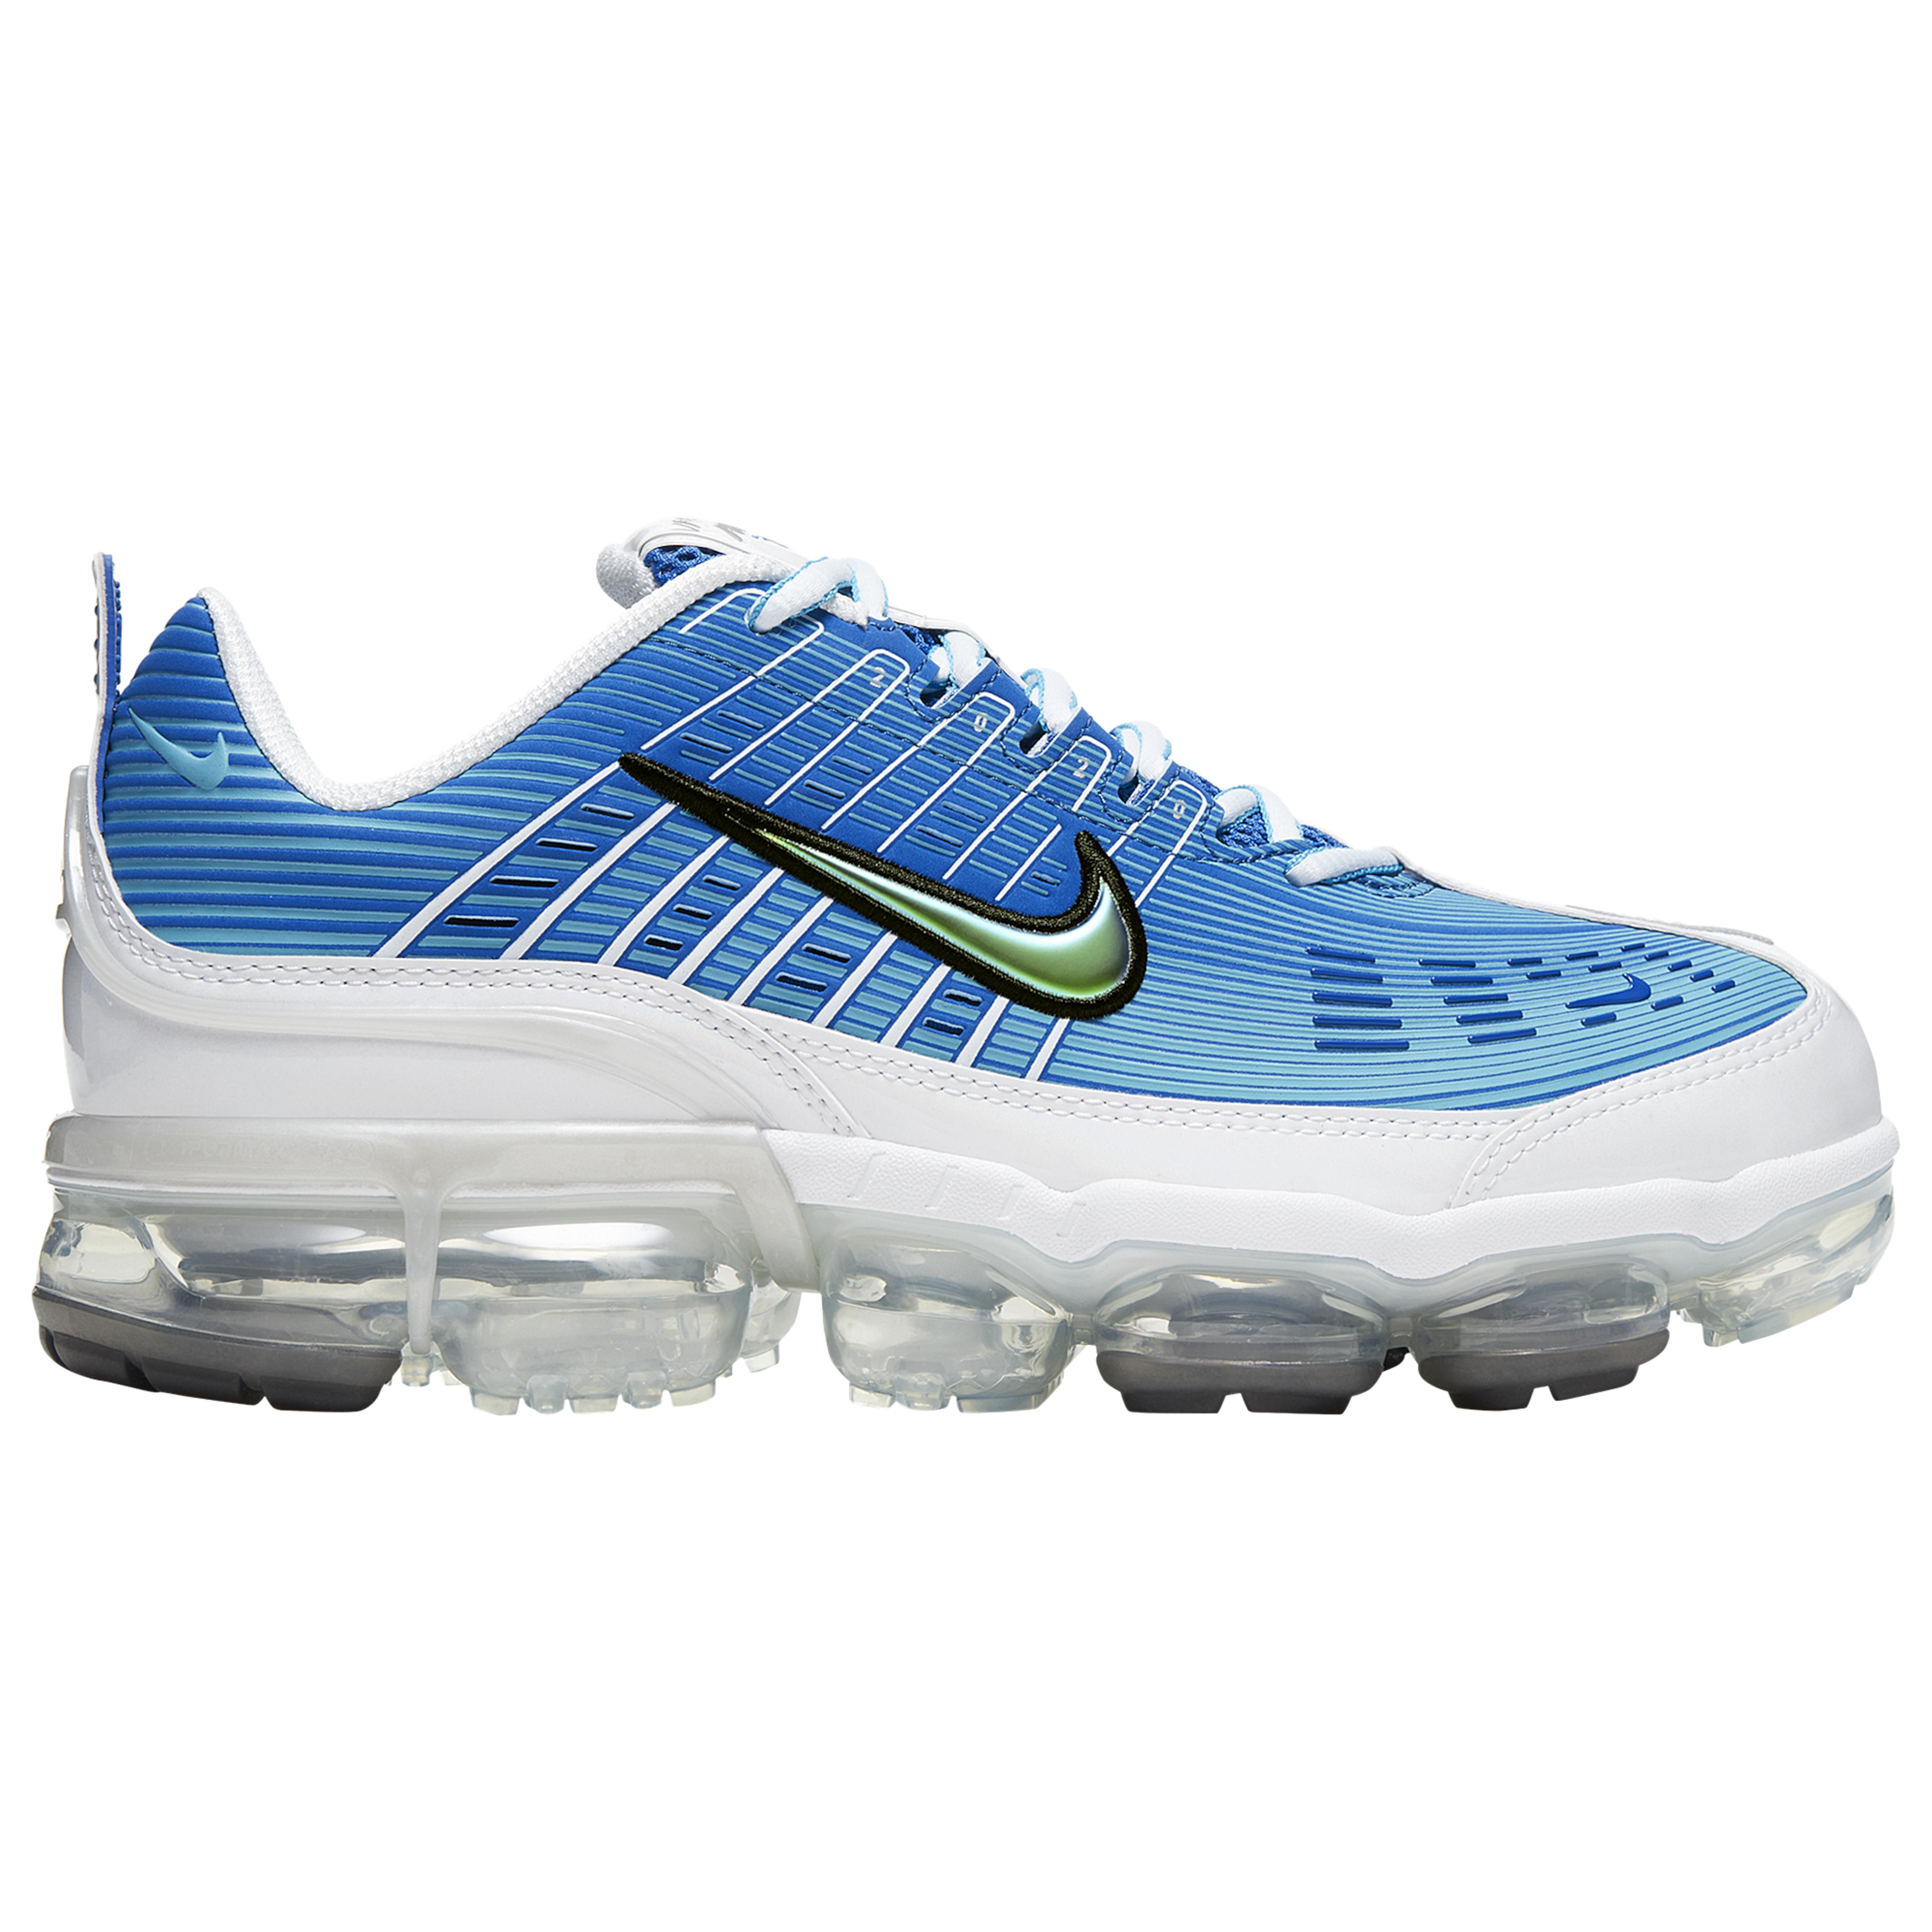 Nike Synthetic Air Vapormax 360 in Blue for Men - Lyst